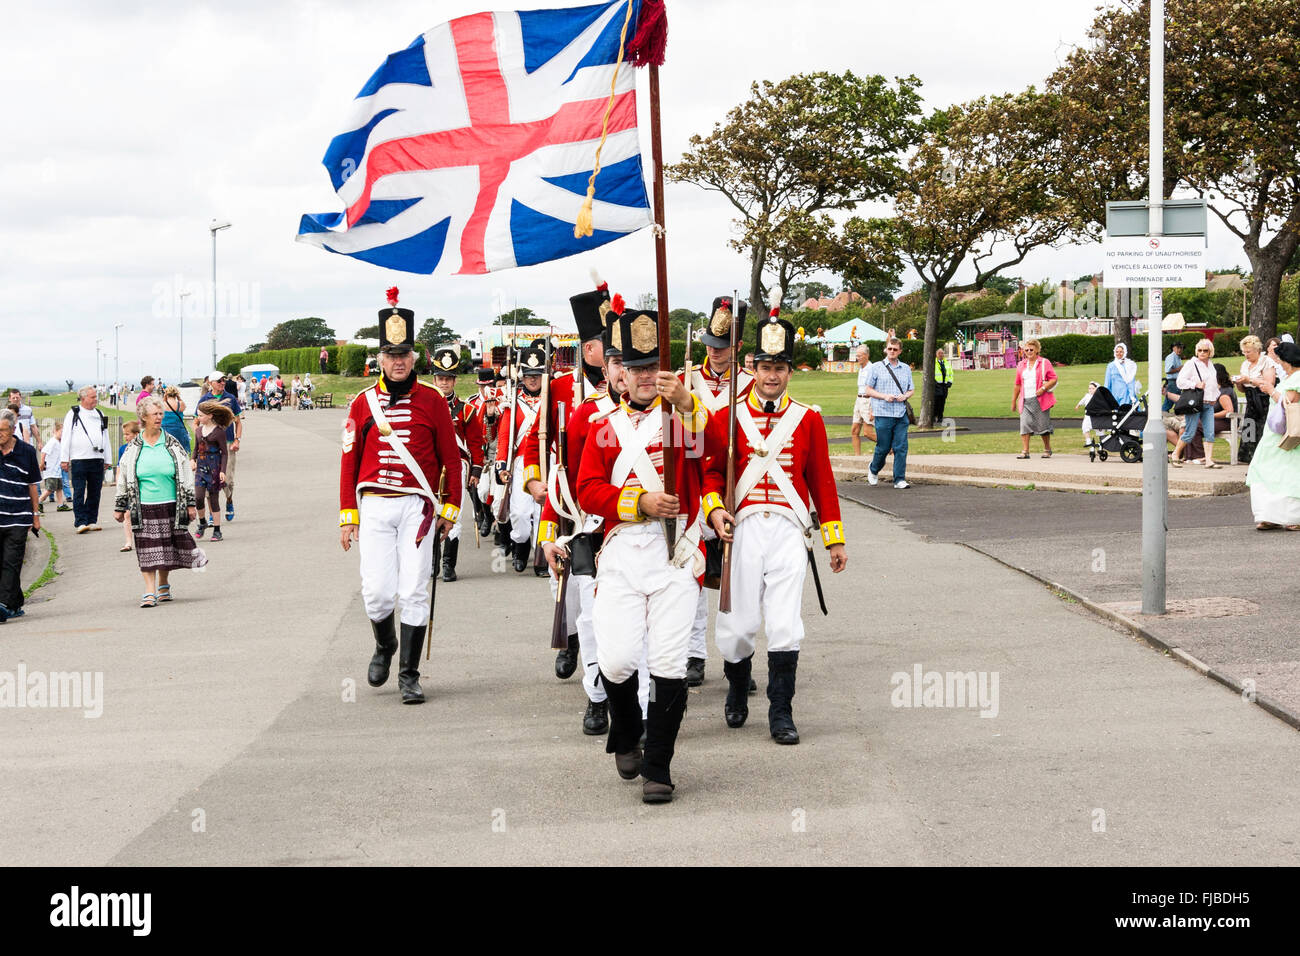 Napoleonic wars re-enactment. British Redcoats, 1st foot regiment, Grenadier Guards, marching towards viewer in column with Union Jack flag flying. Stock Photo